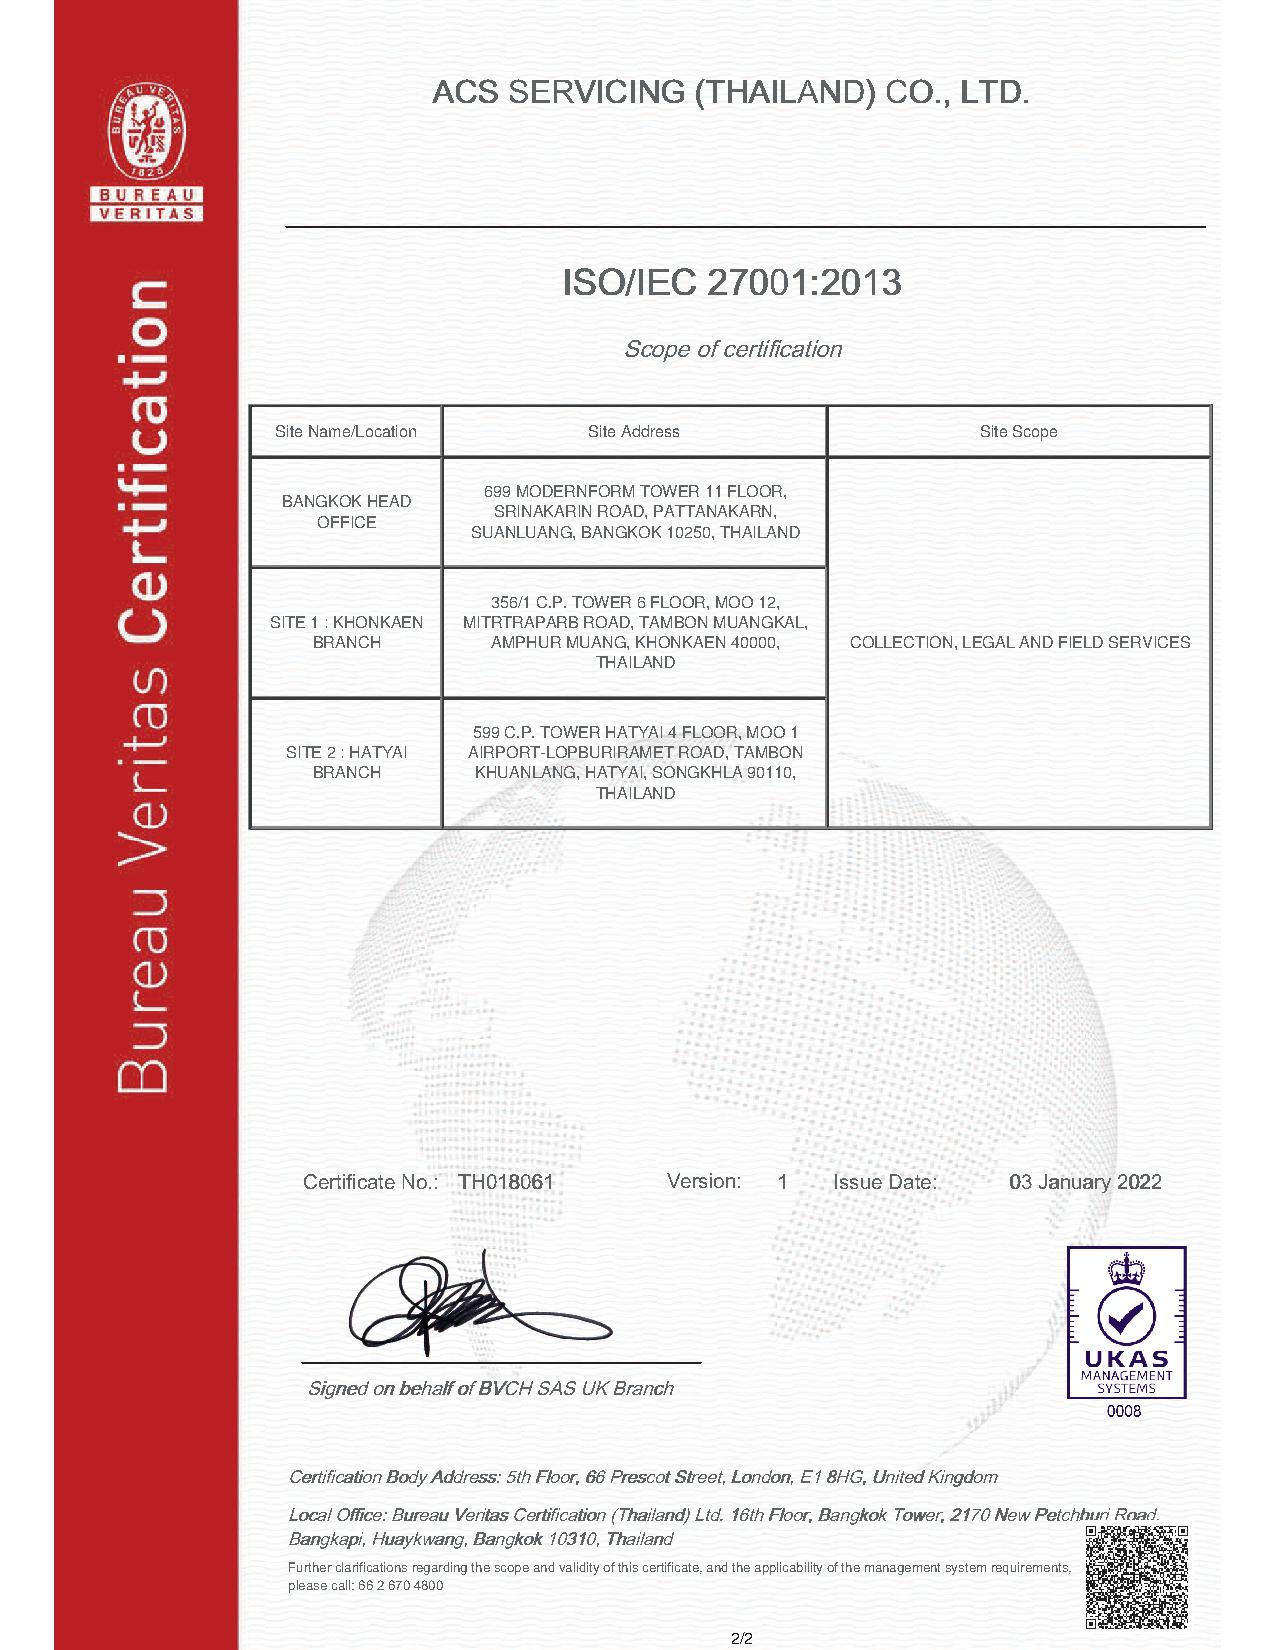 ISO Certification of ACSS